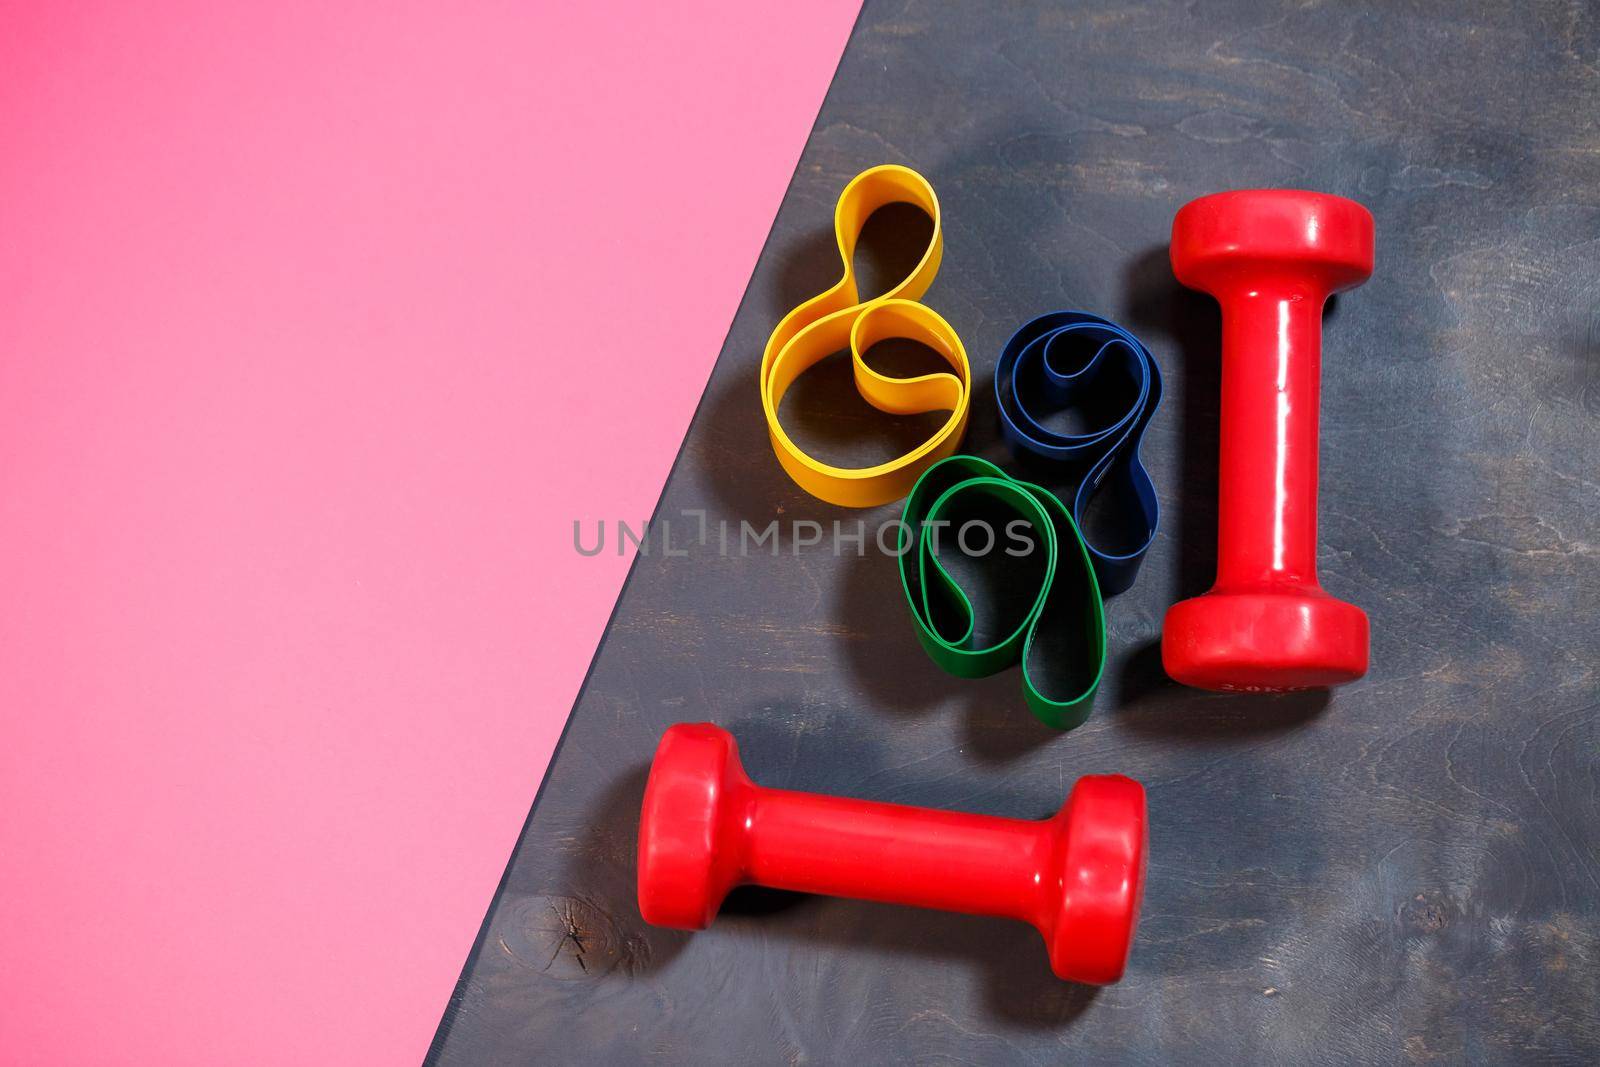 Red dumbbells and elastic bands for sports on a pink background. Healthy lifestyle. Fitness equipment for weight training. Muscle development and fitness training by Dmitrytph